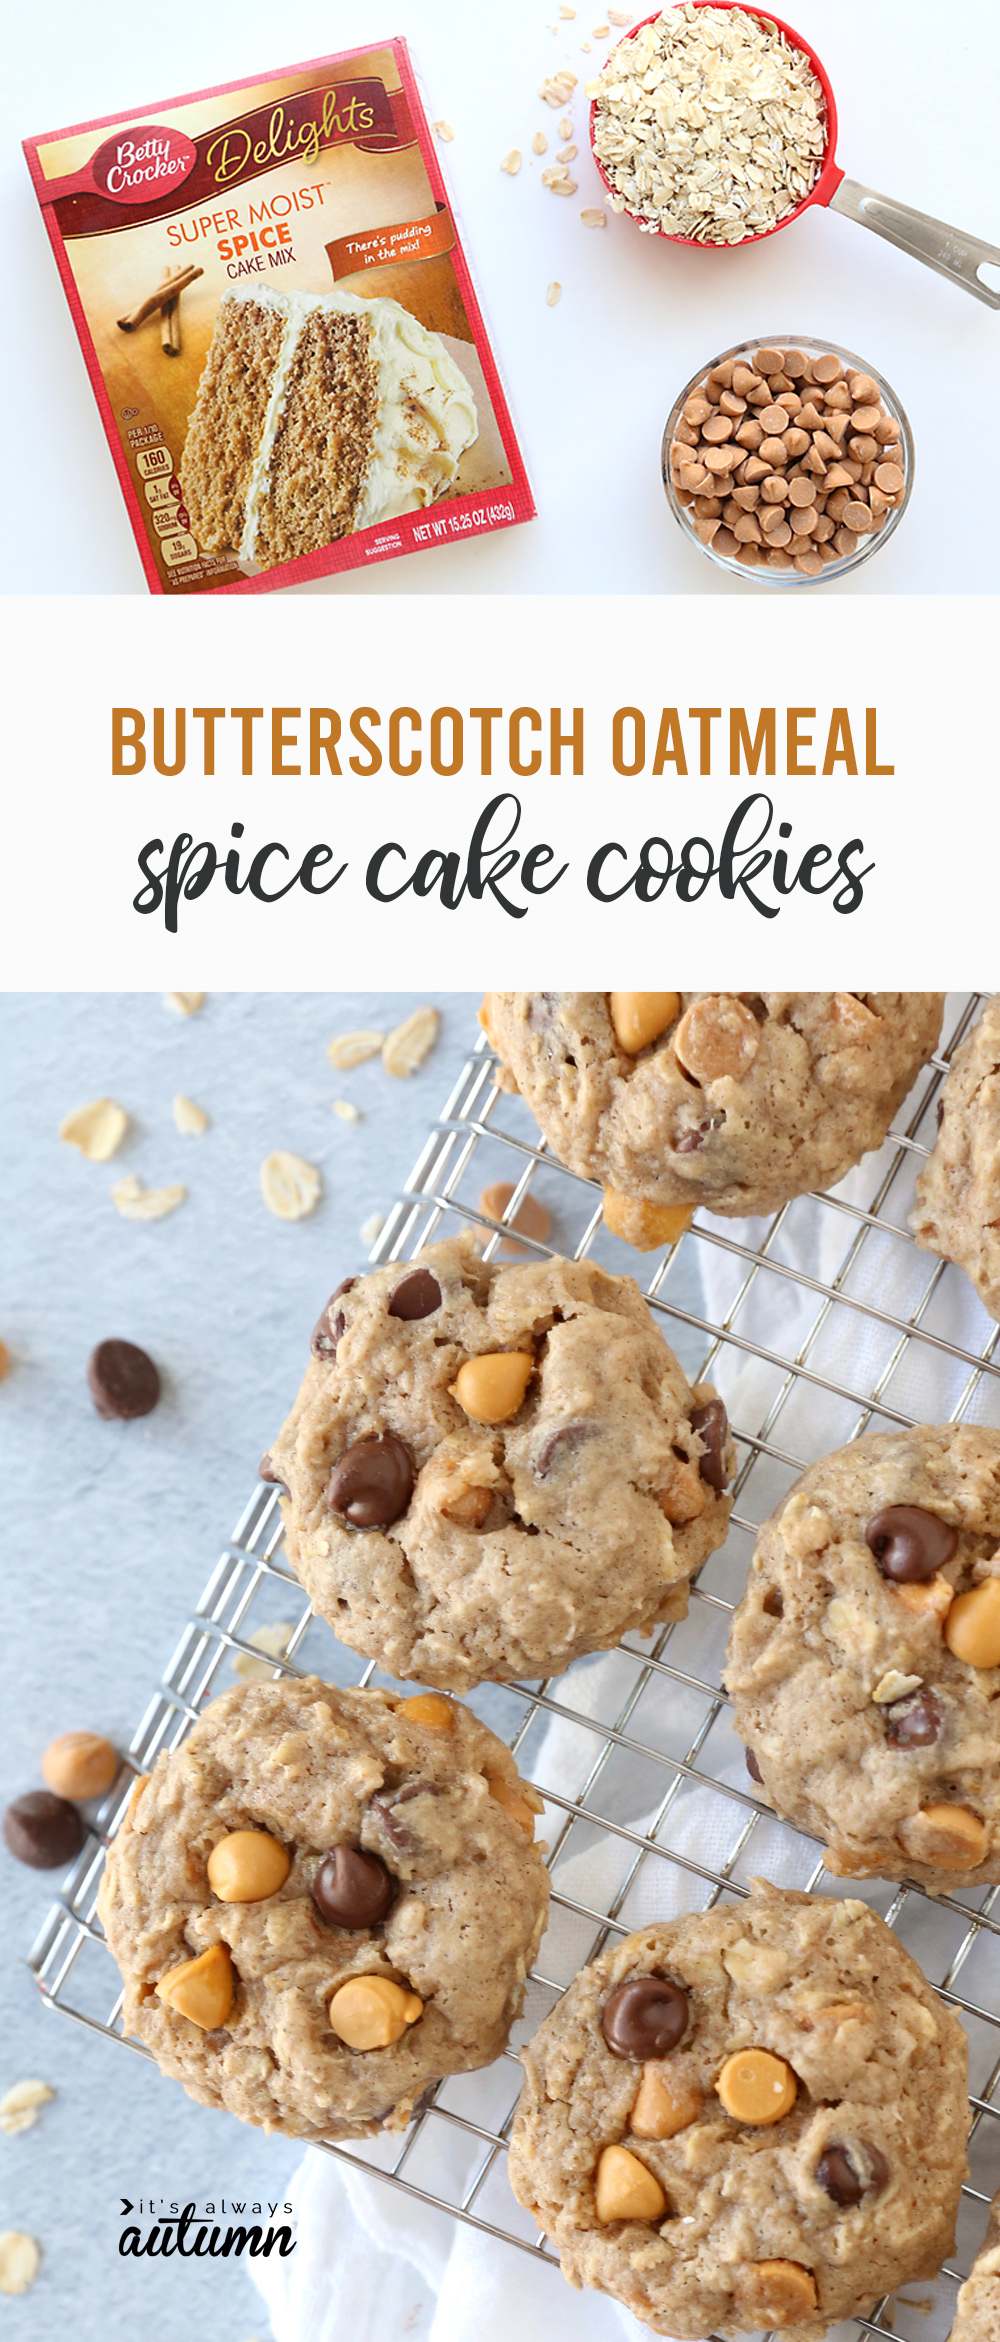 Butterscotch oatmeal spice cookies are crazy delicious!